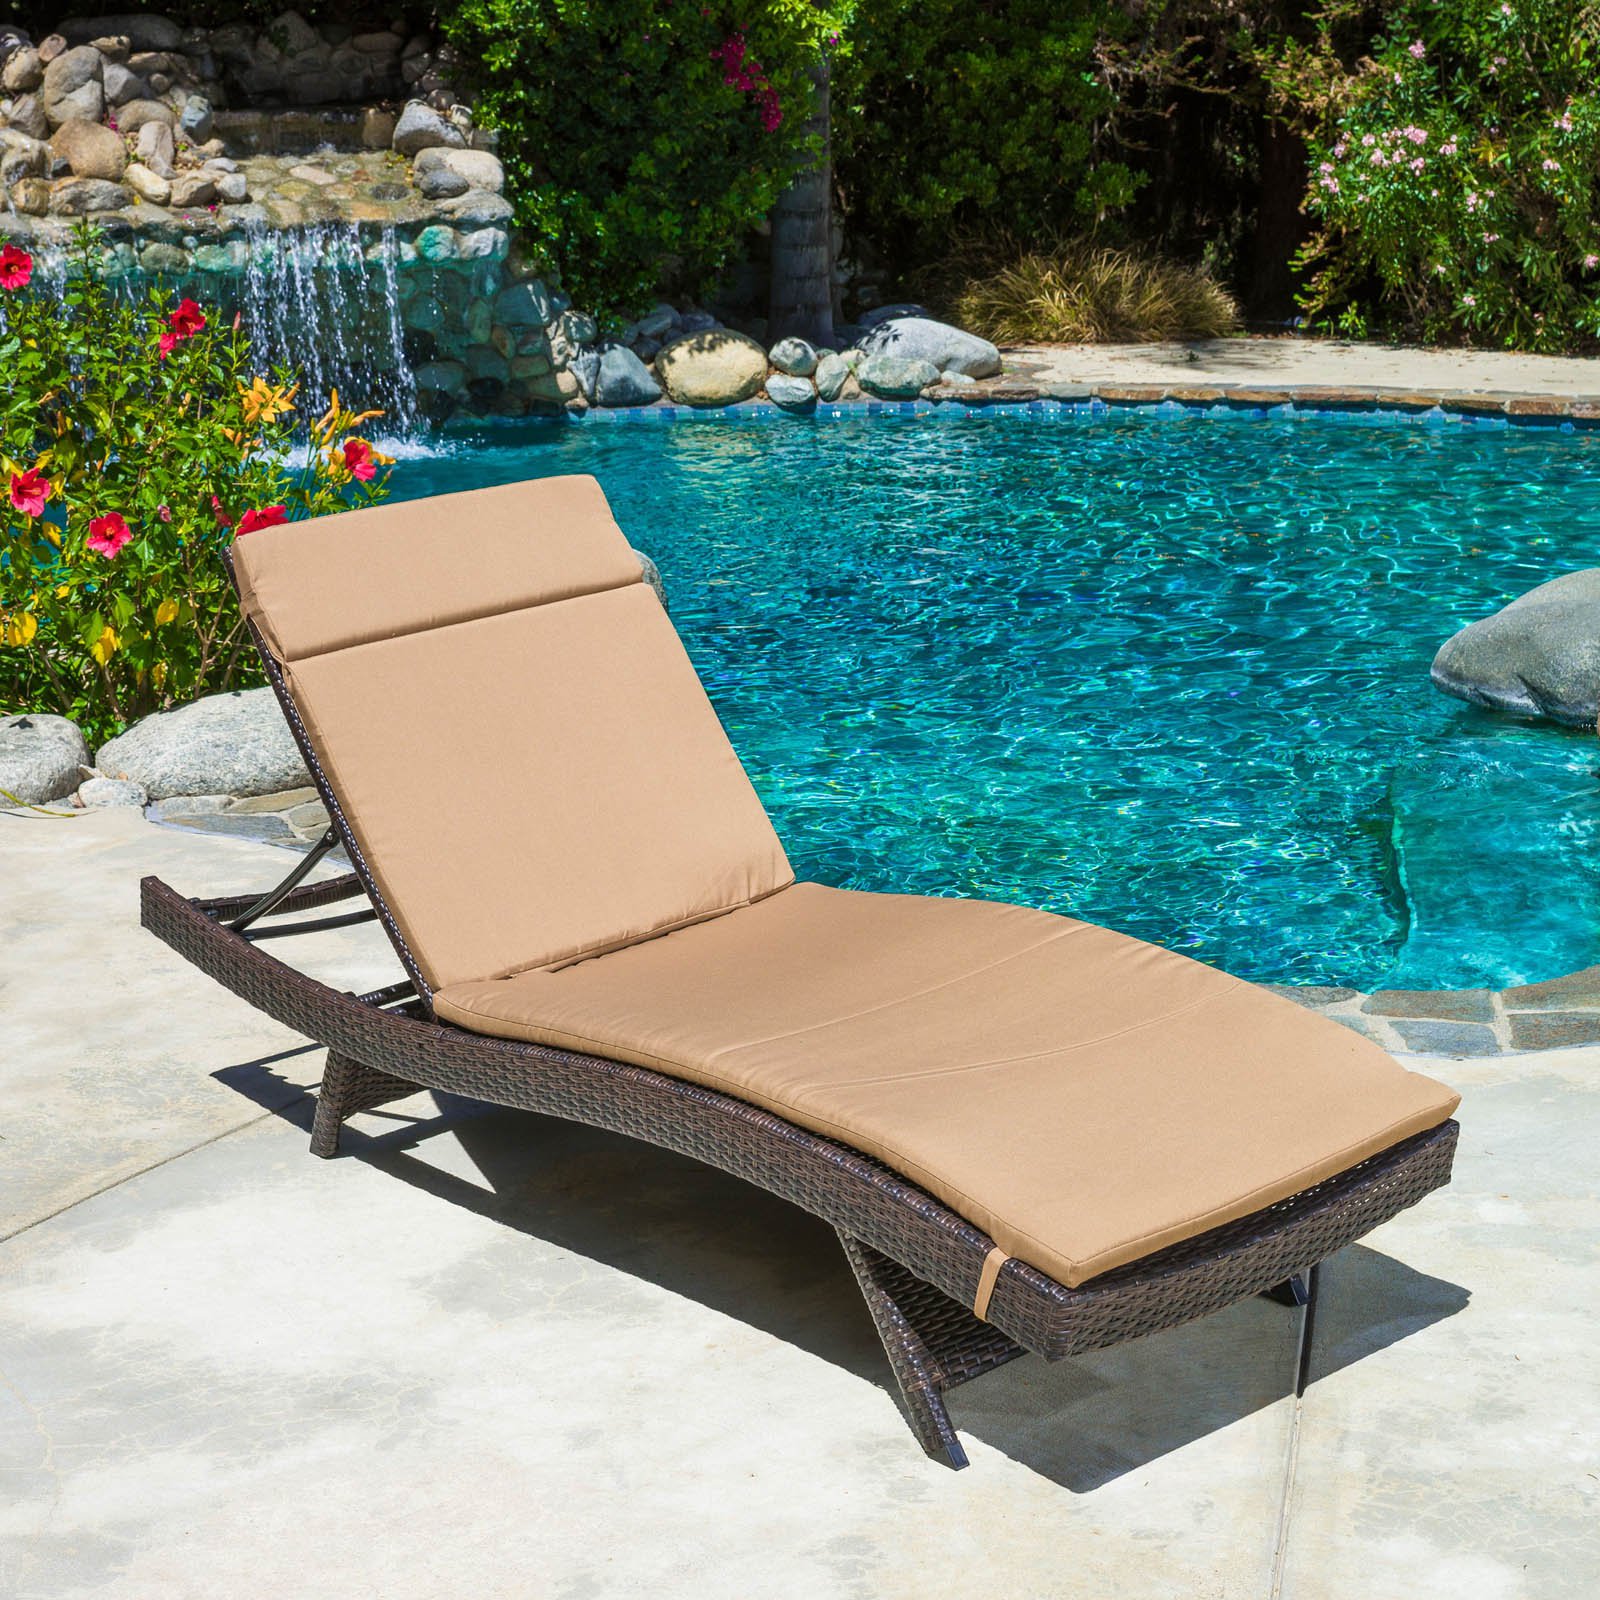 Outdoor Adjustable Chaise Lounge with Colored Cushion - image 1 of 2